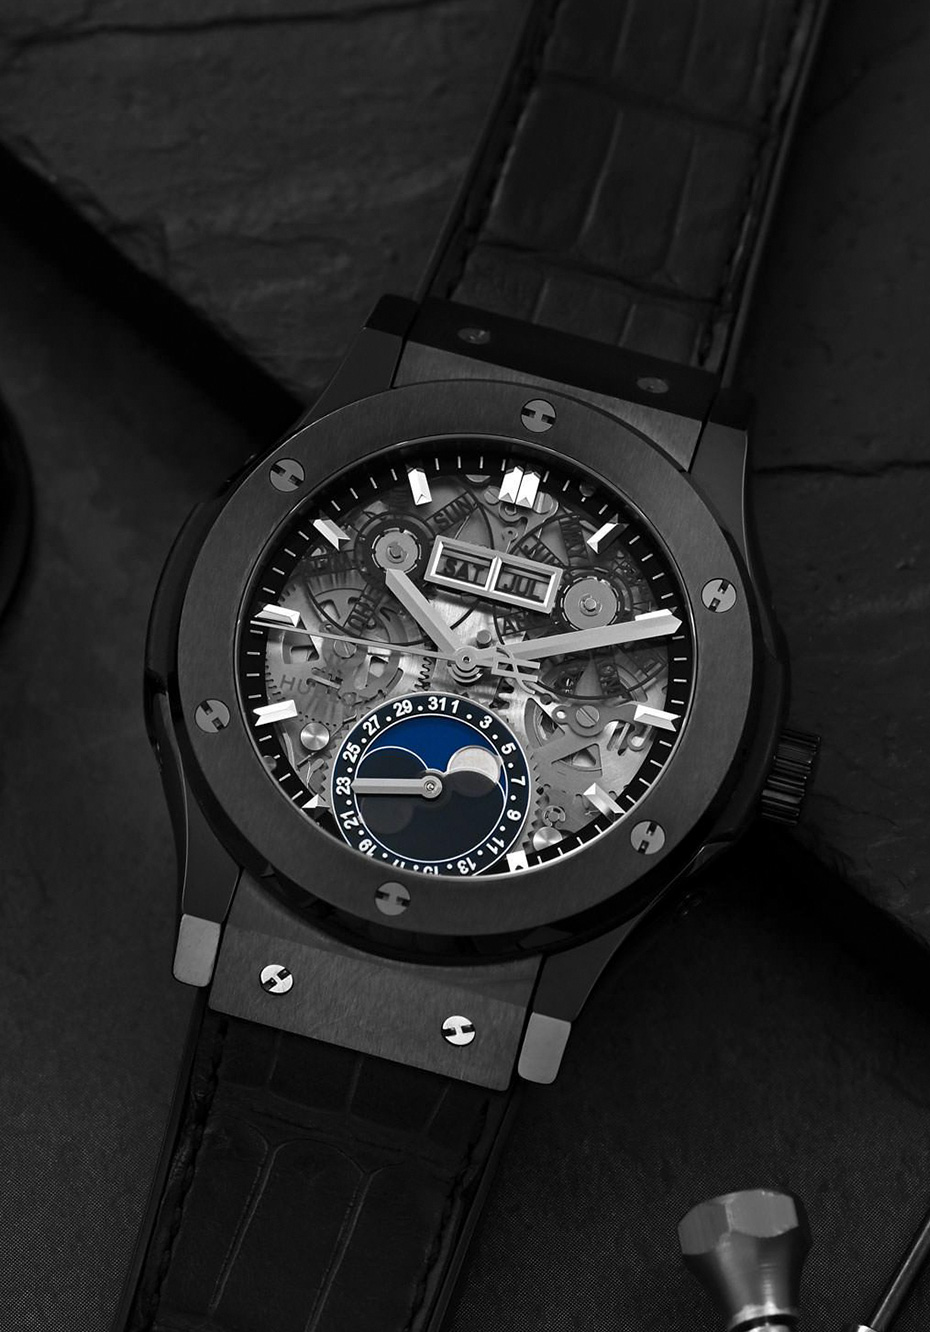 Top 10 Moonphase Watches of All Time (Updated 2023) – Sekoni Original